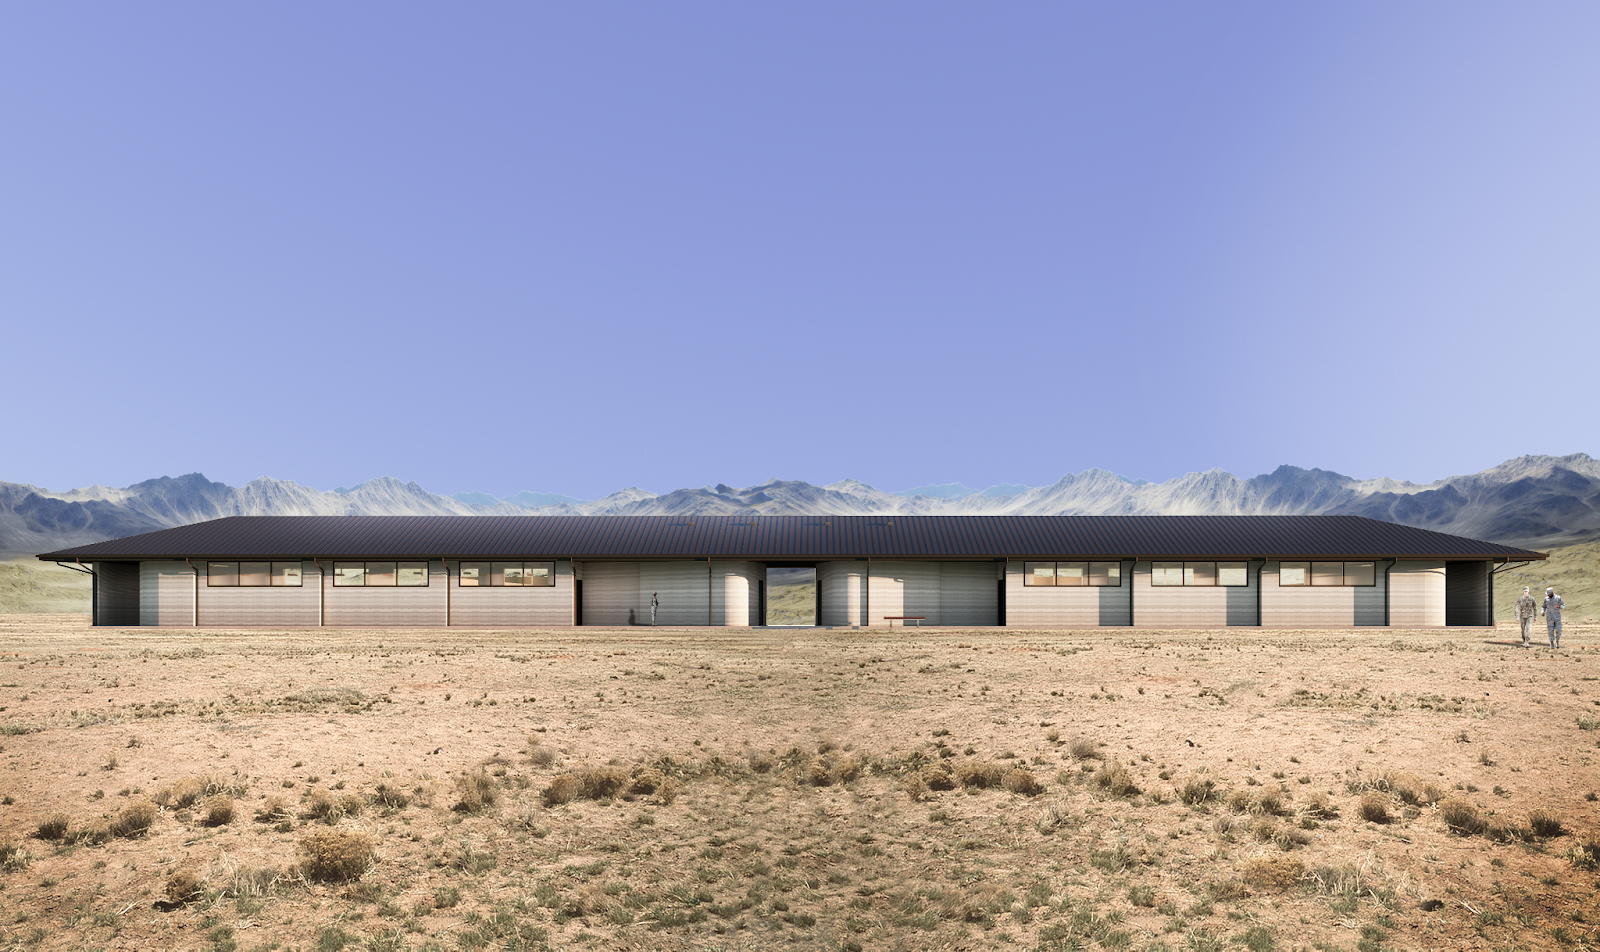 Concept render of 3D-printed barracks at Ft. Bliss 